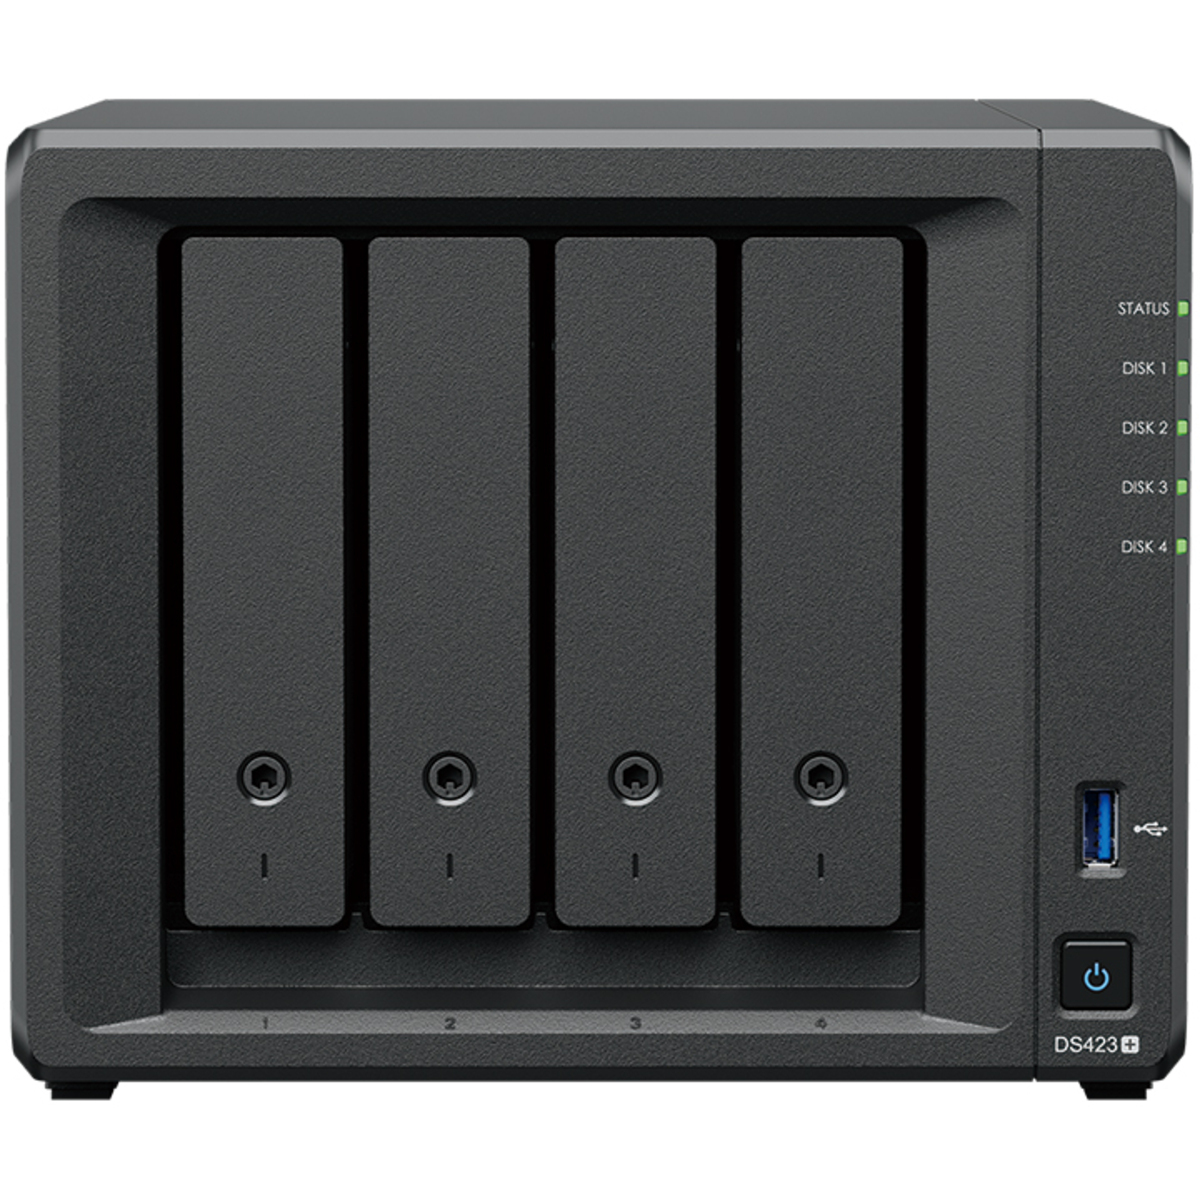 Synology DiskStation DS423+ 28tb 4-Bay Desktop Multimedia / Power User / Business NAS - Network Attached Storage Device 2x14tb Toshiba Enterprise Capacity MG07ACA14TE 3.5 7200rpm SATA 6Gb/s HDD ENTERPRISE Class Drives Installed - Burn-In Tested - FREE RAM UPGRADE DiskStation DS423+